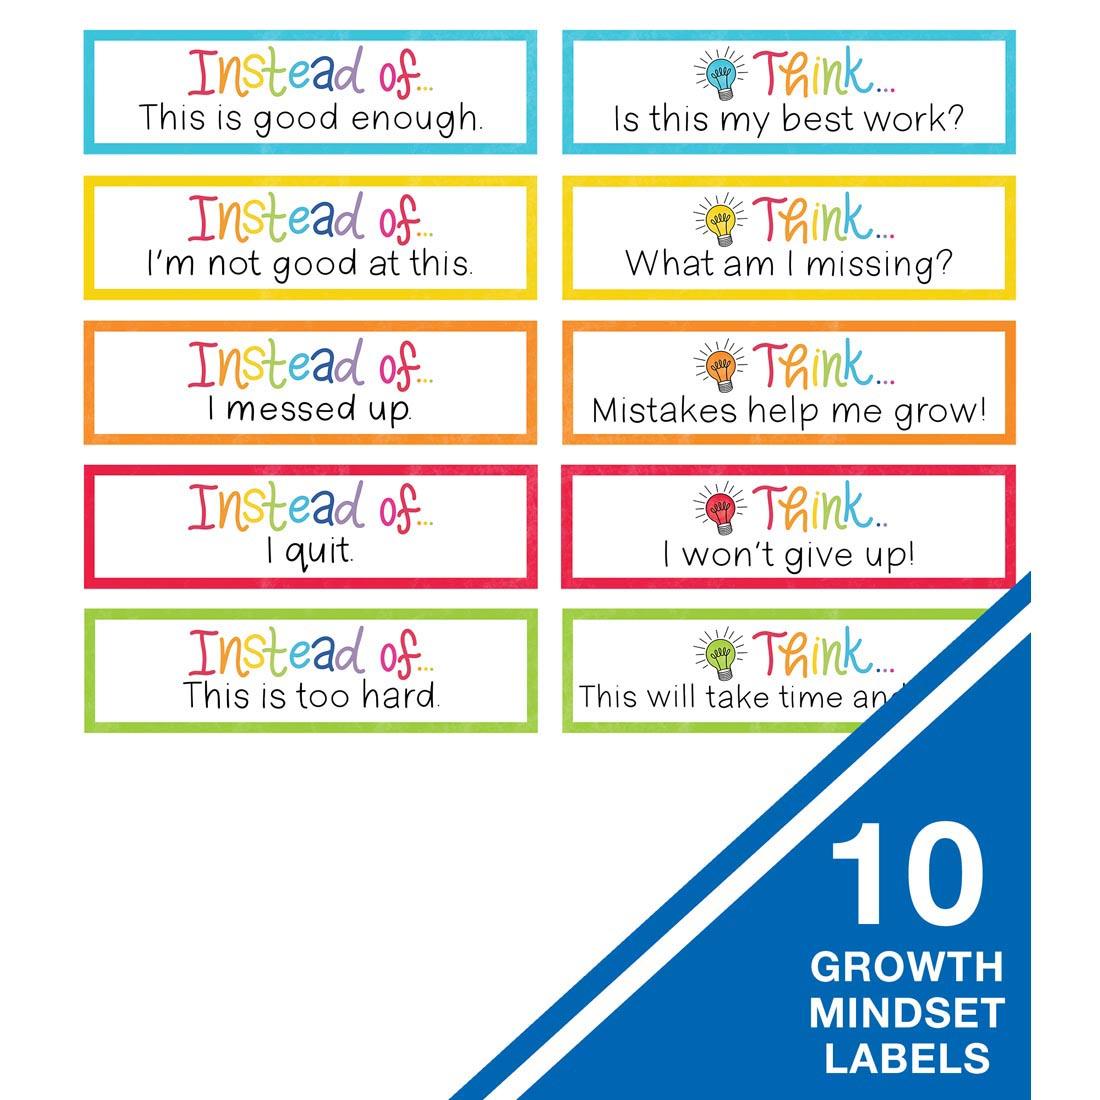 Growth mindset labels from the Light Bulb Moments Growth Mindset Mini Bulletin Board Set By Carson Dellosa, suggesting alternative ways to frame negative thoughts